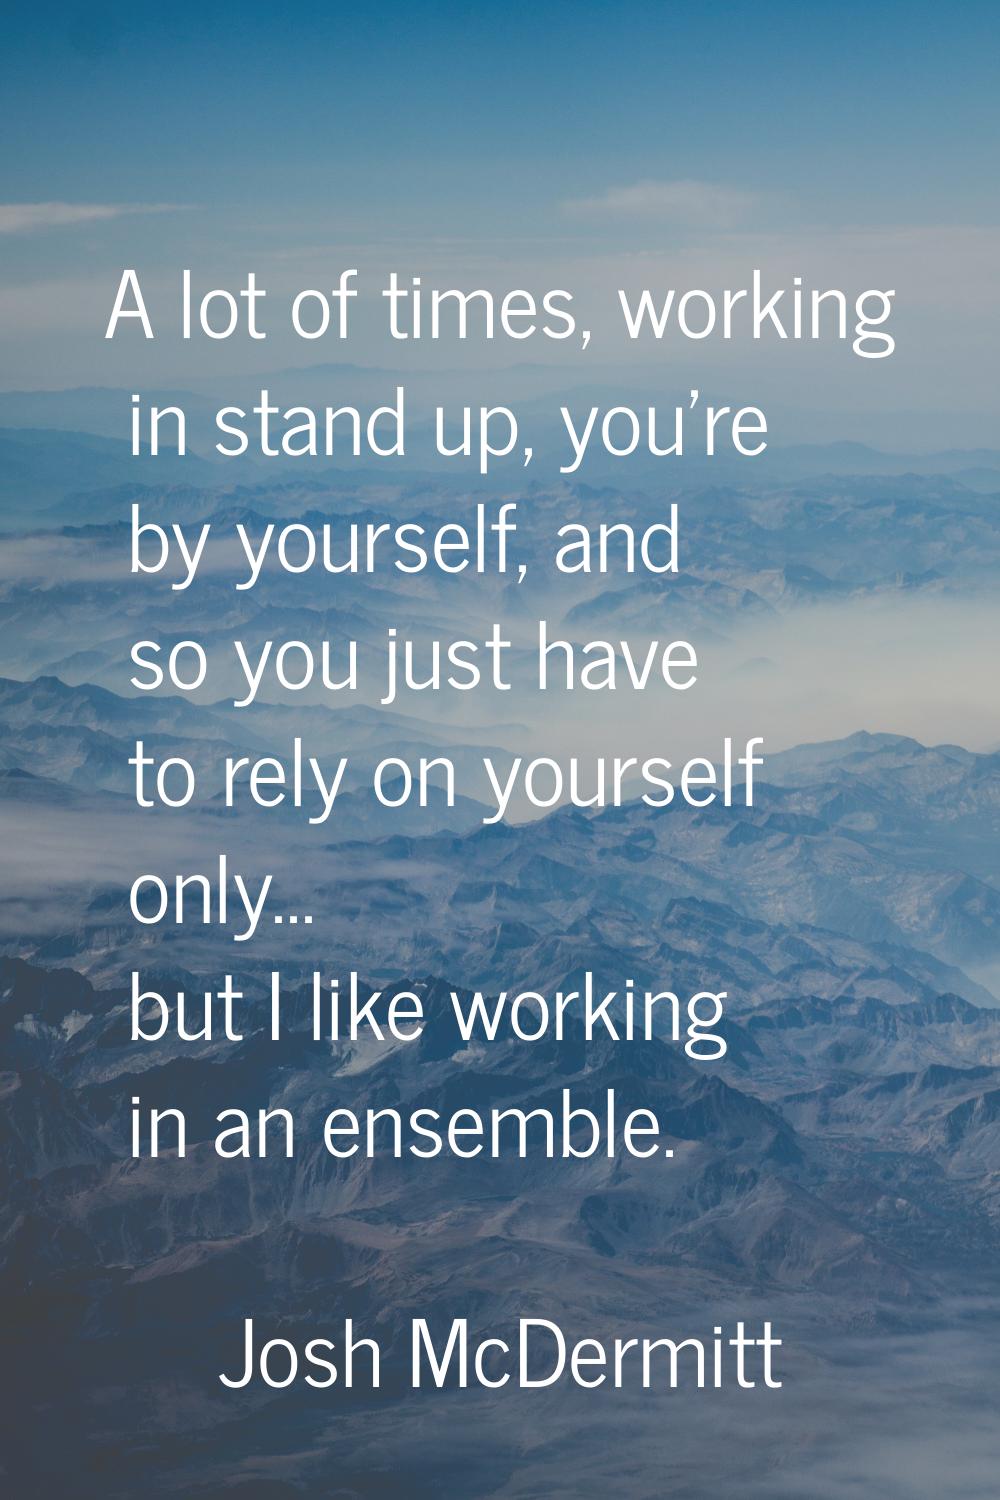 A lot of times, working in stand up, you're by yourself, and so you just have to rely on yourself o